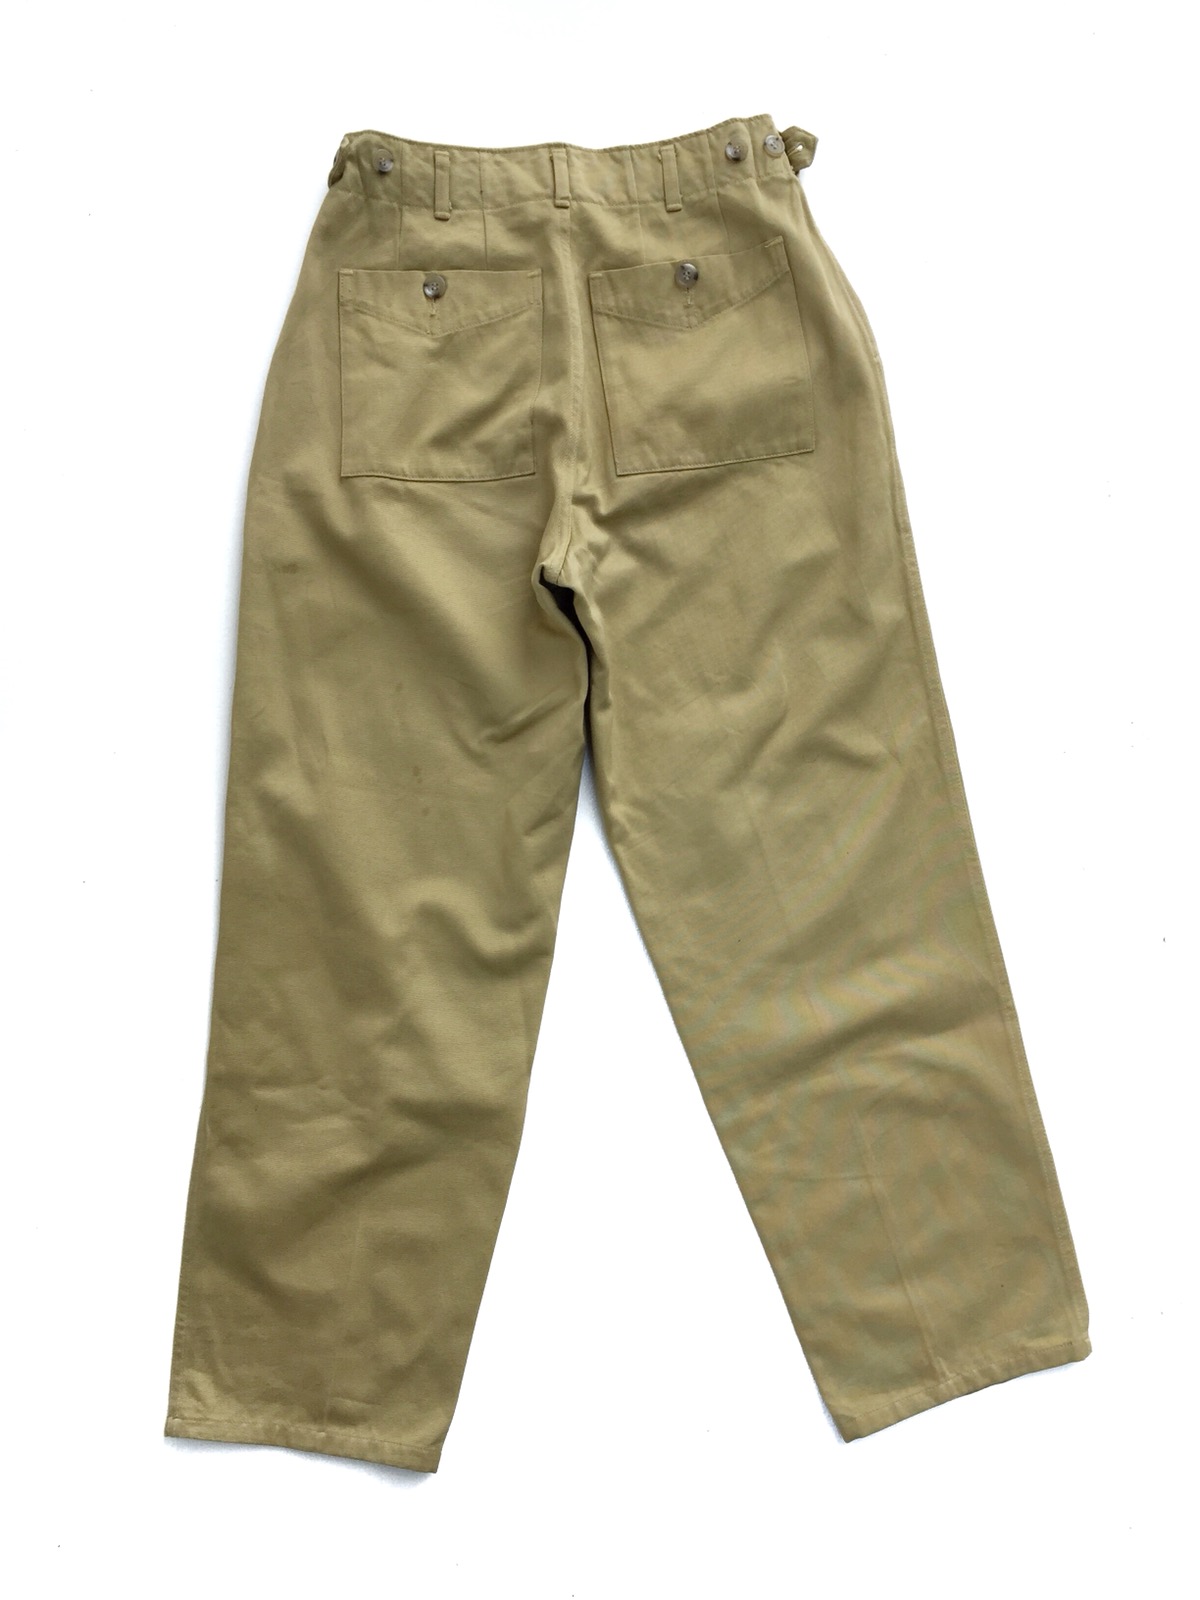 Nigel Cabourn Military Army Design Baggy Trousers Pants - 2